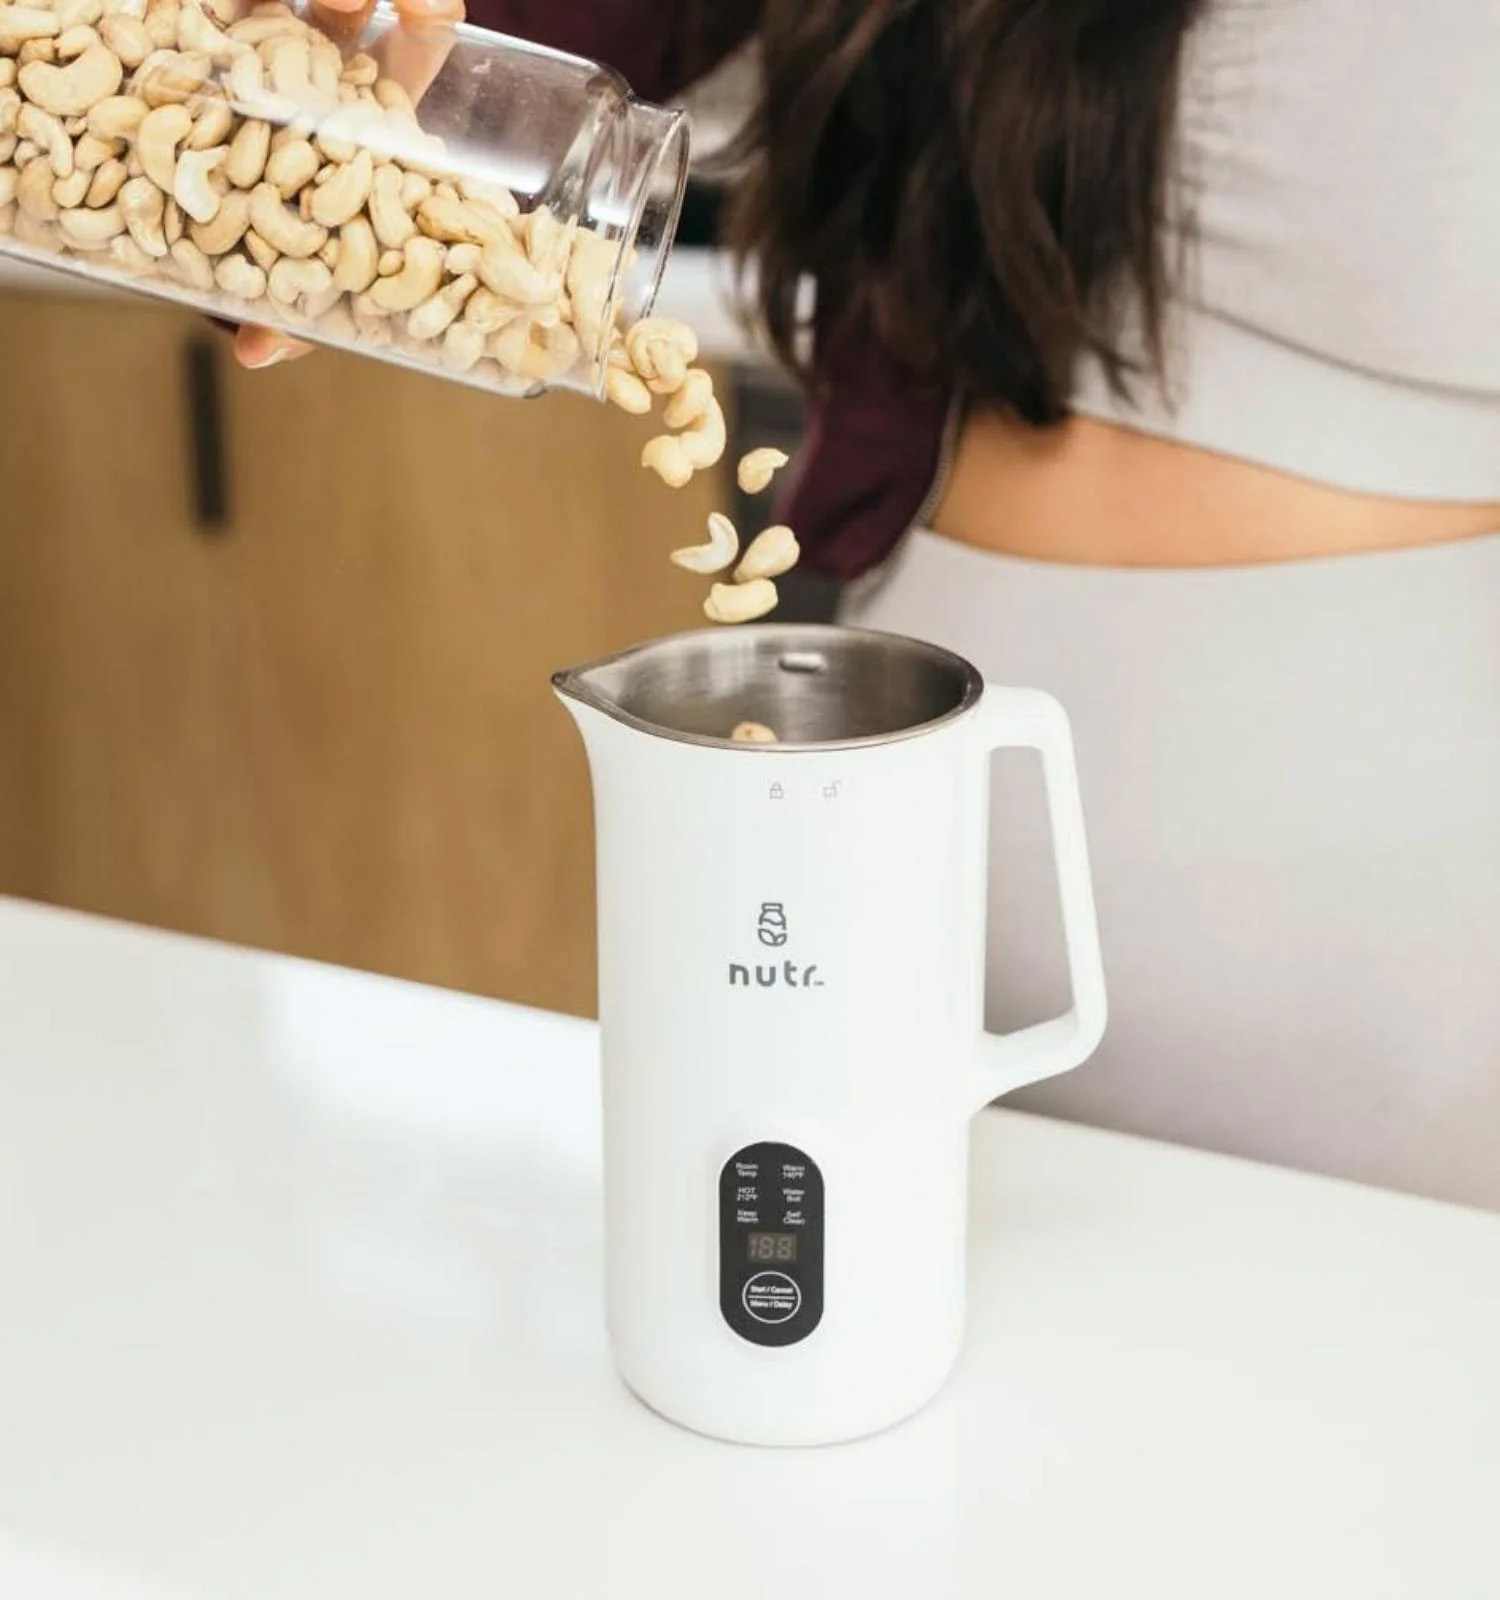 Person pouring nuts into Nutr machine